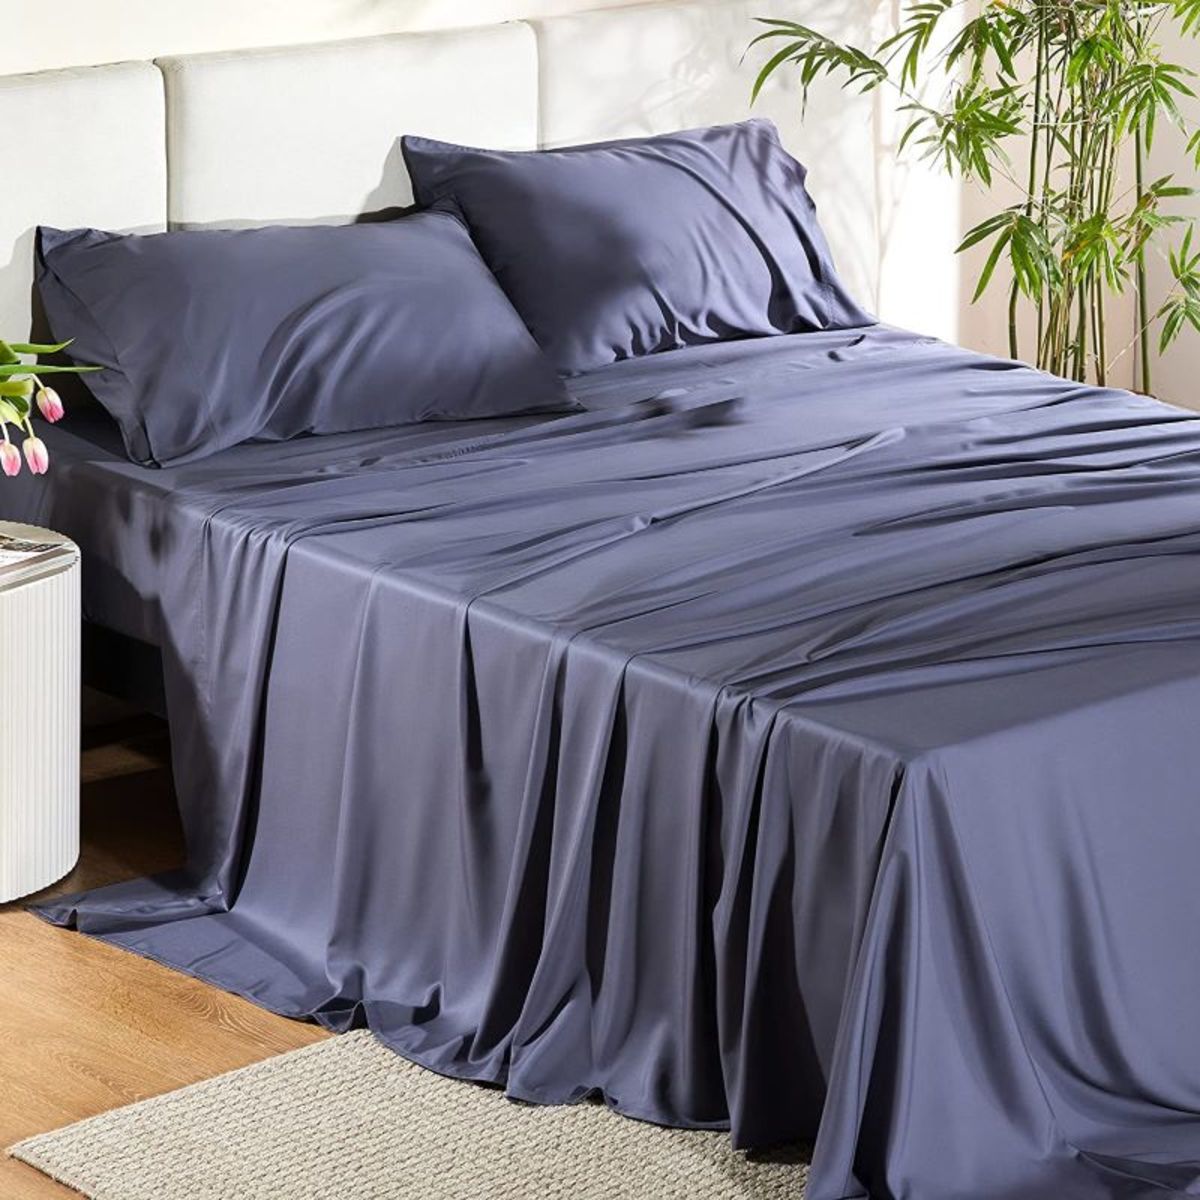 Hot sleeper? This breathable sheet set, loved by 107000+ shoppers